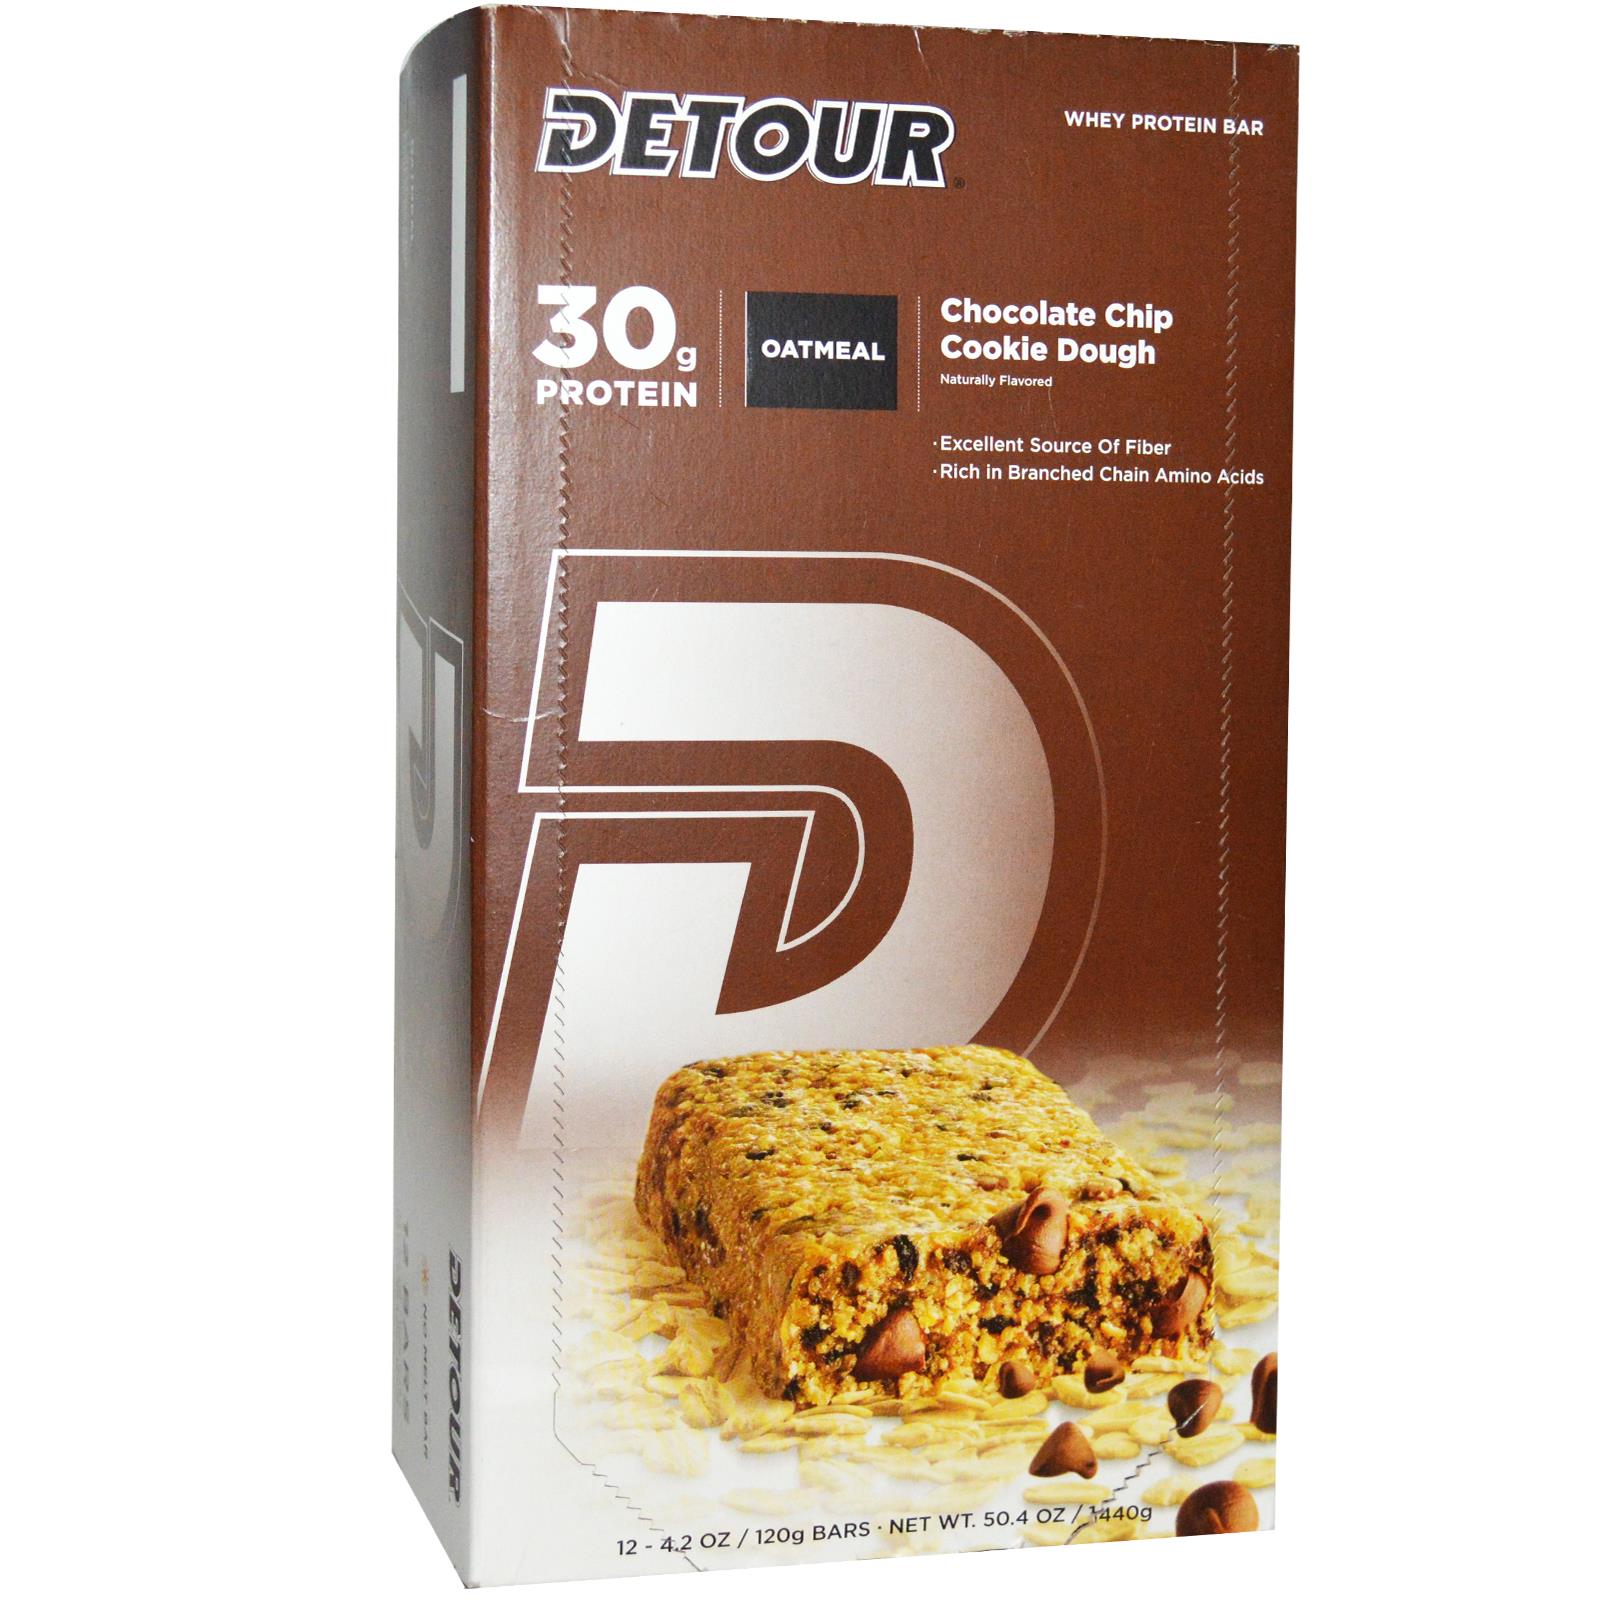 Detour Oatmeal Whey Protein Bar Chocolate Chip Cookie Dough